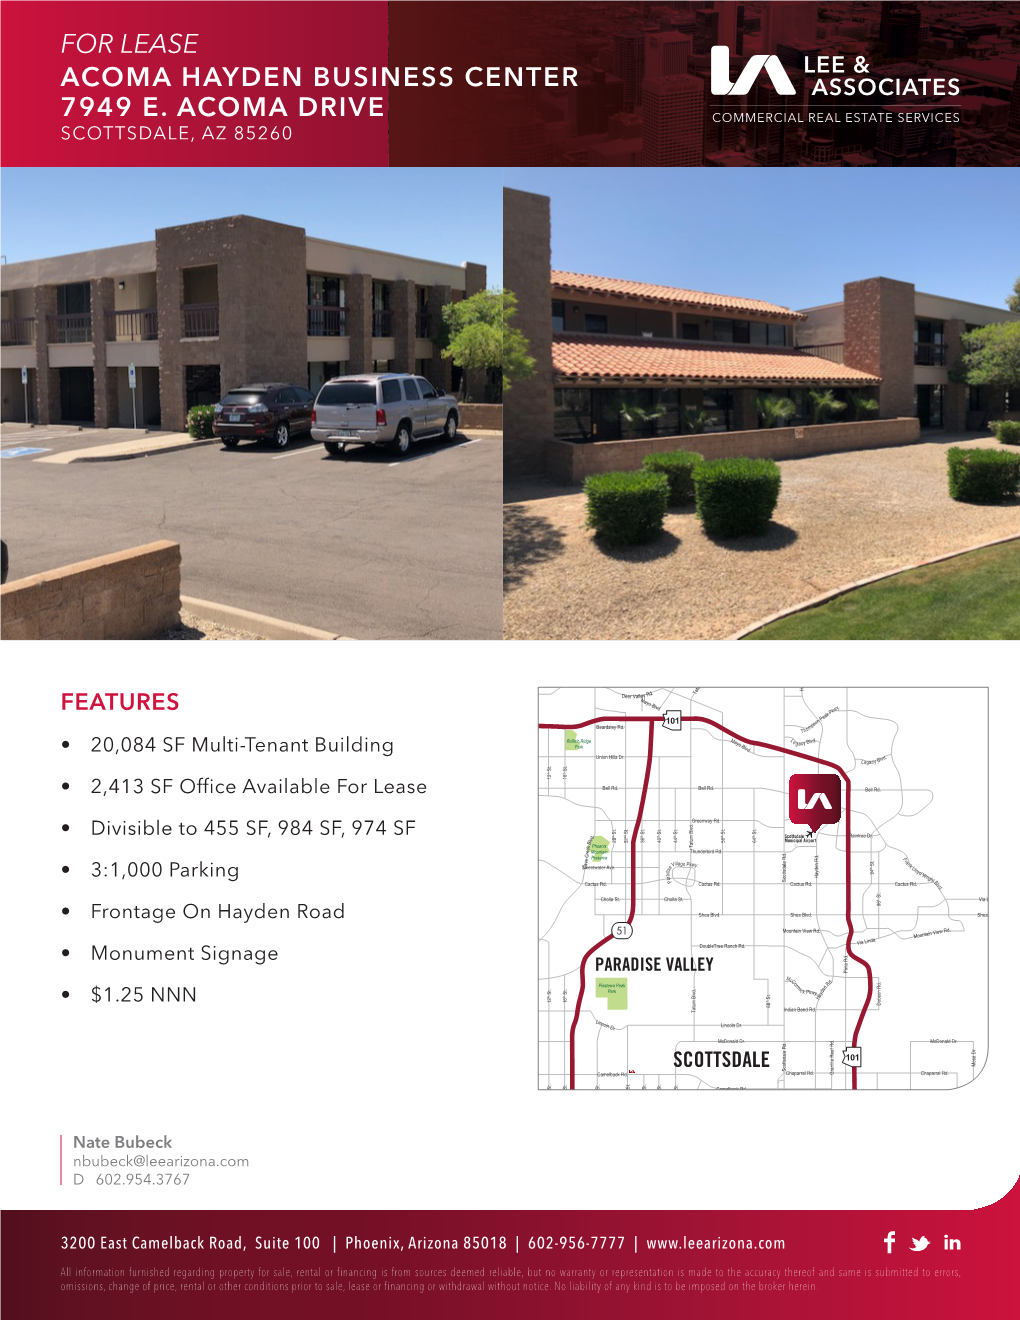 Acoma Hayden Business Center 7949 E. Acoma Drive for Lease